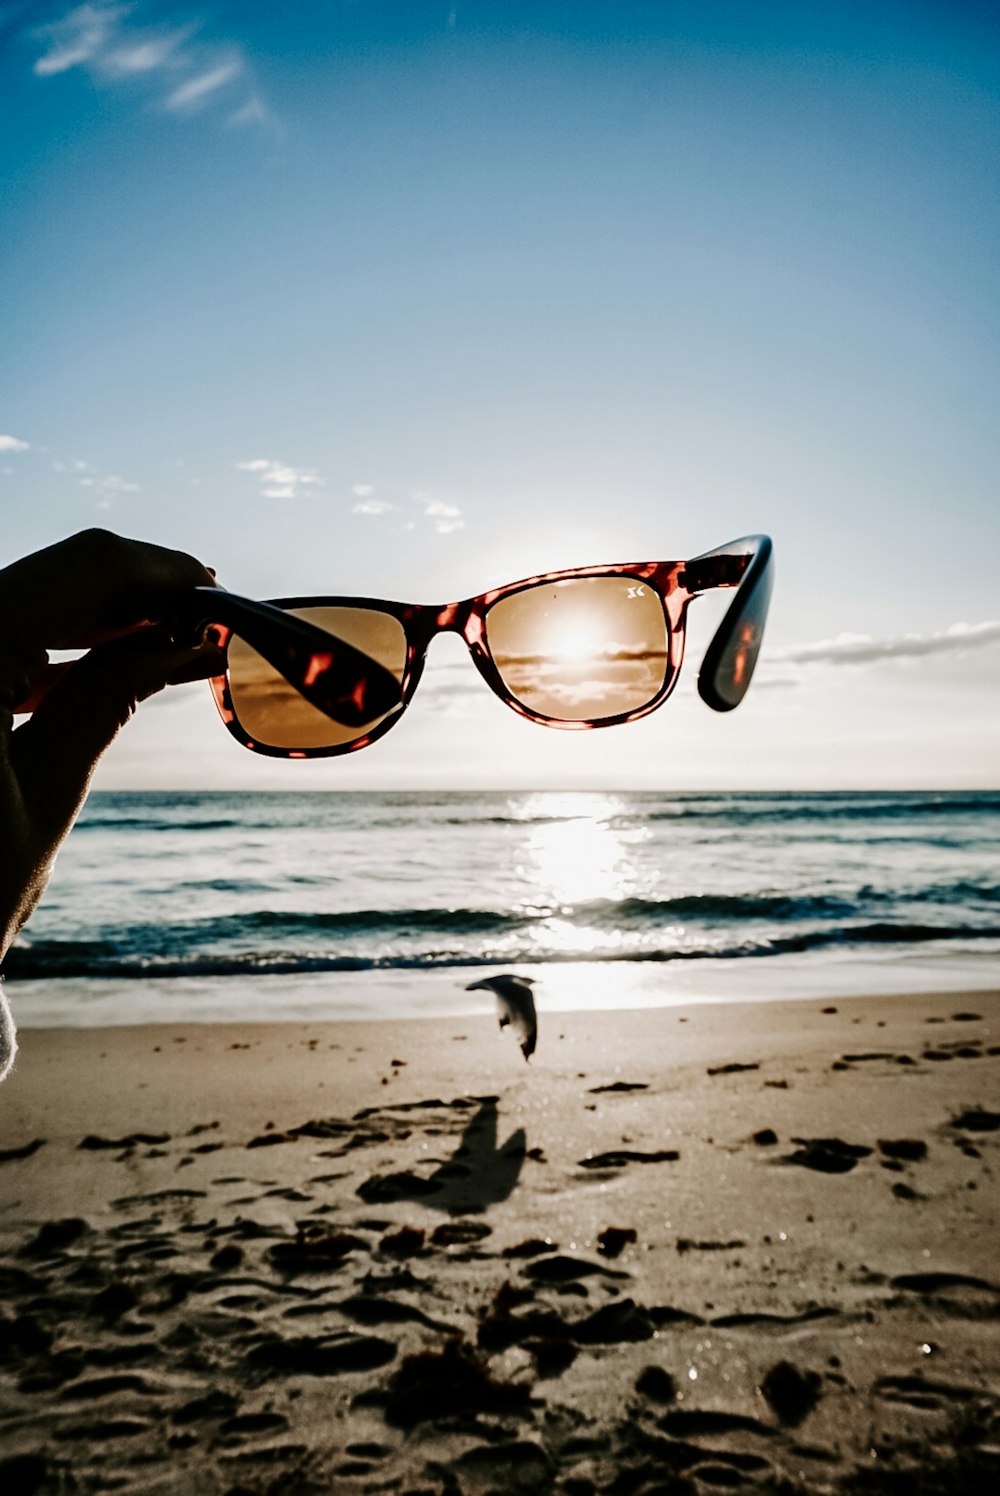 person holding sunglasses on beach during daytime